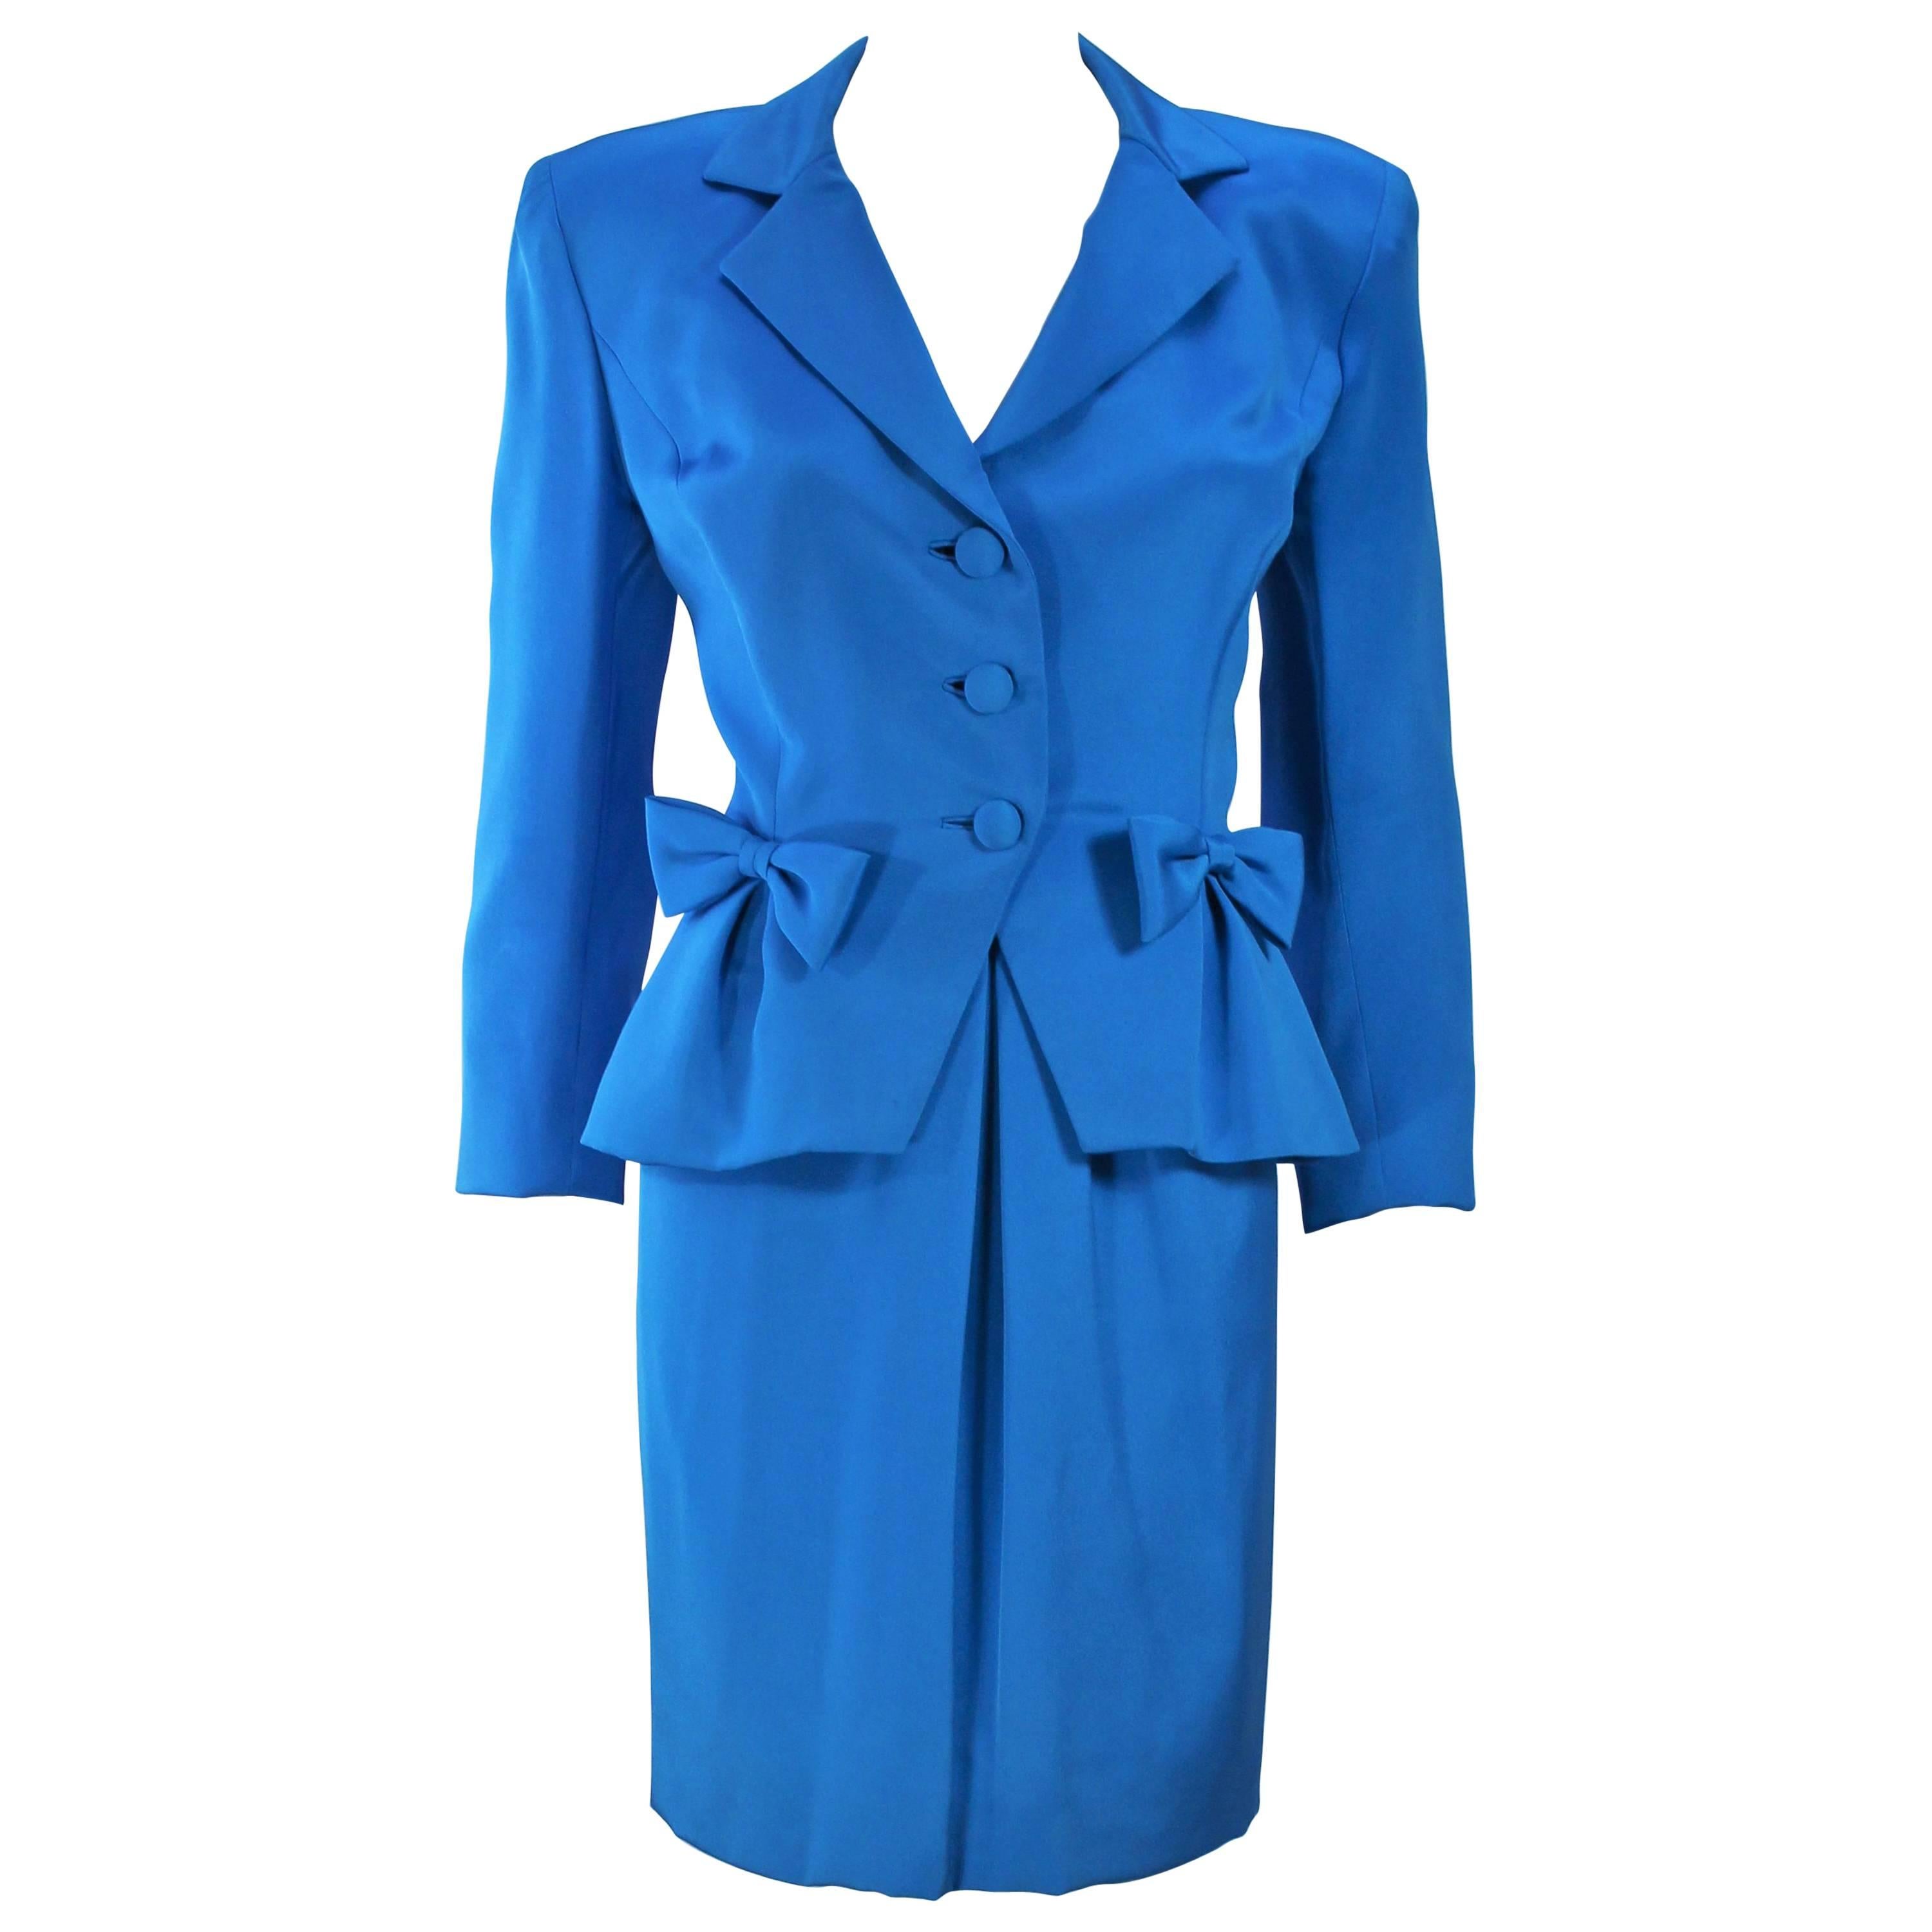 TRAVILLA Blue Silk Skirt Suit with Bows Size 6 For Sale